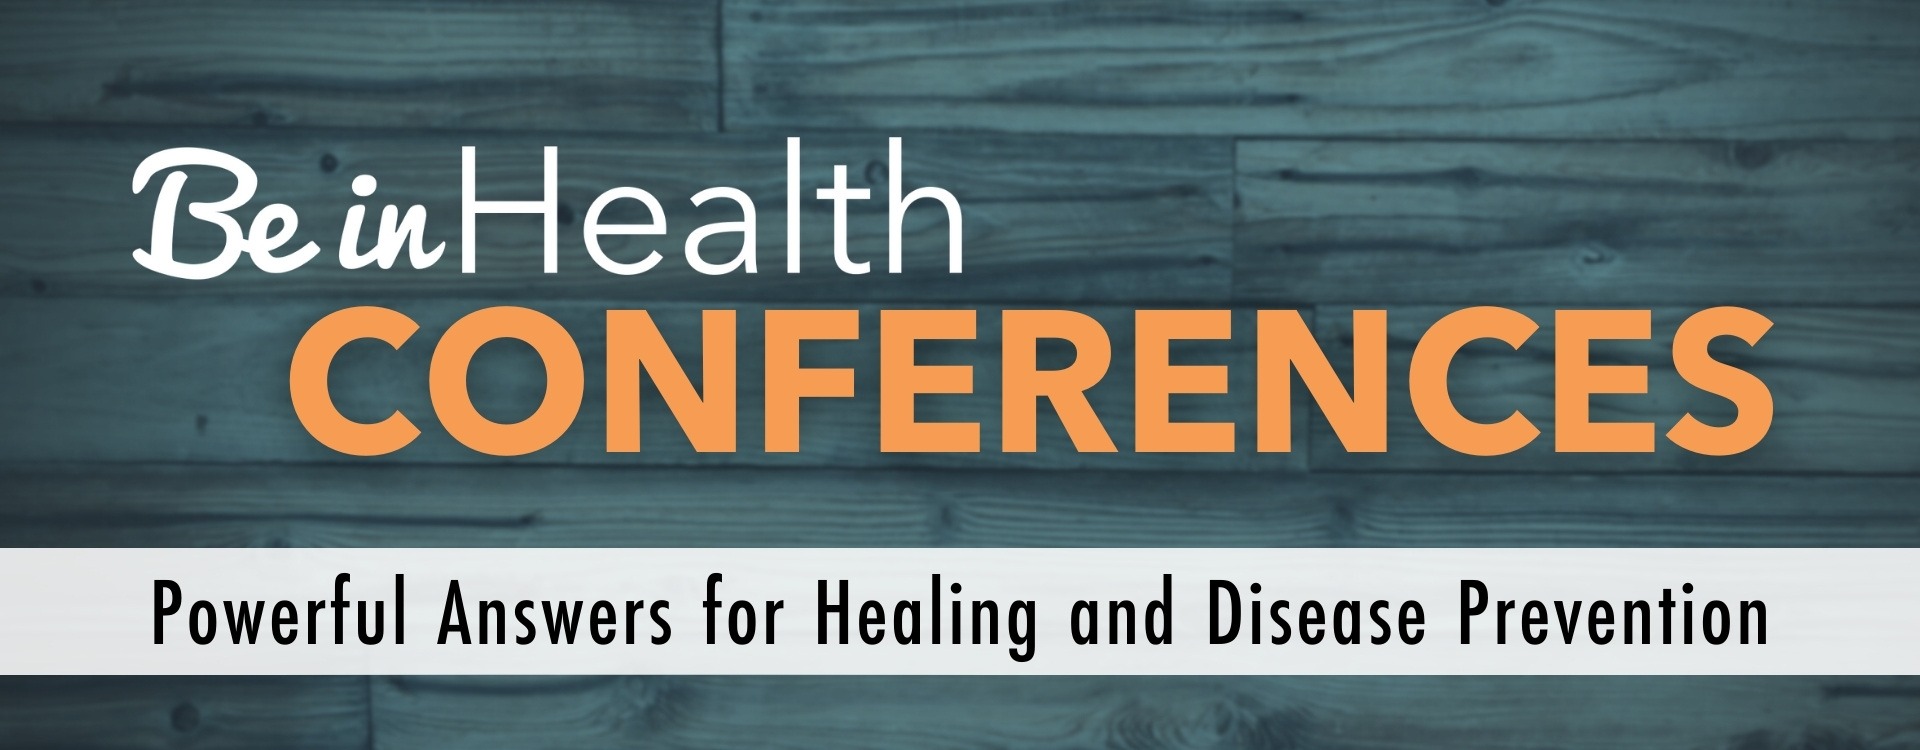 Be in Health Conferences